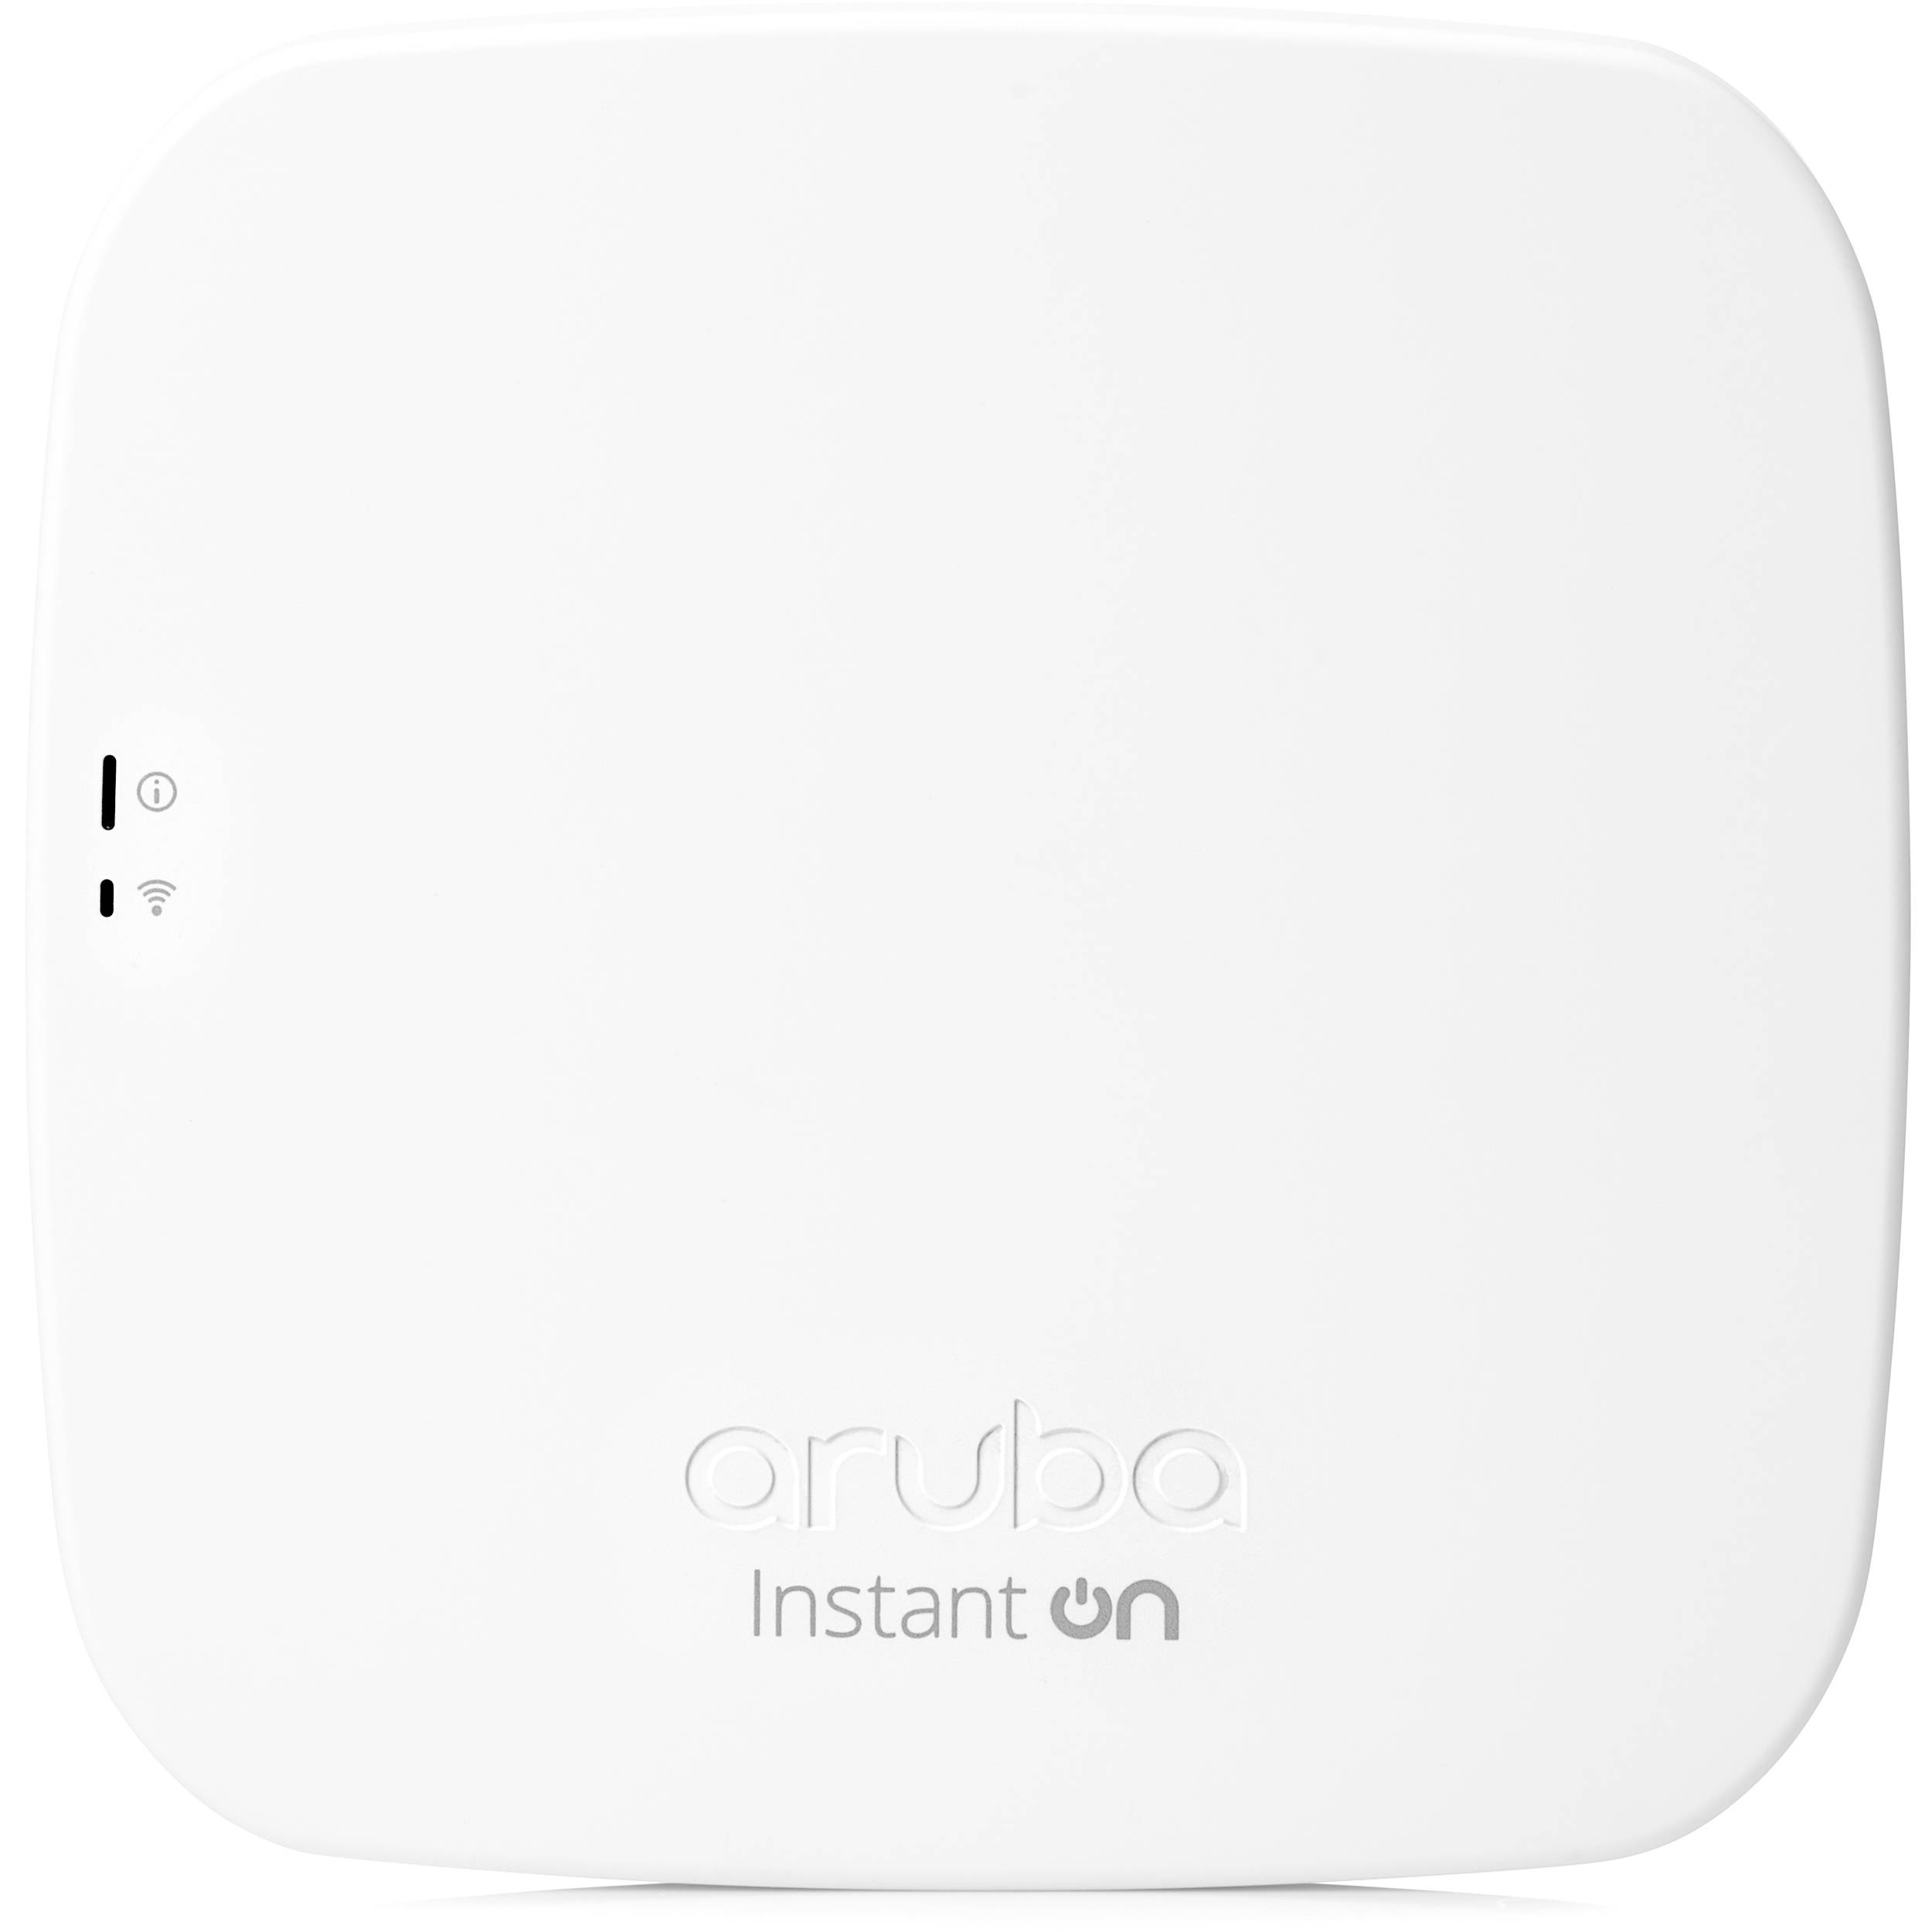 R2X00A | Instant On 3X3 11ac Wave2 Indoor Access Point